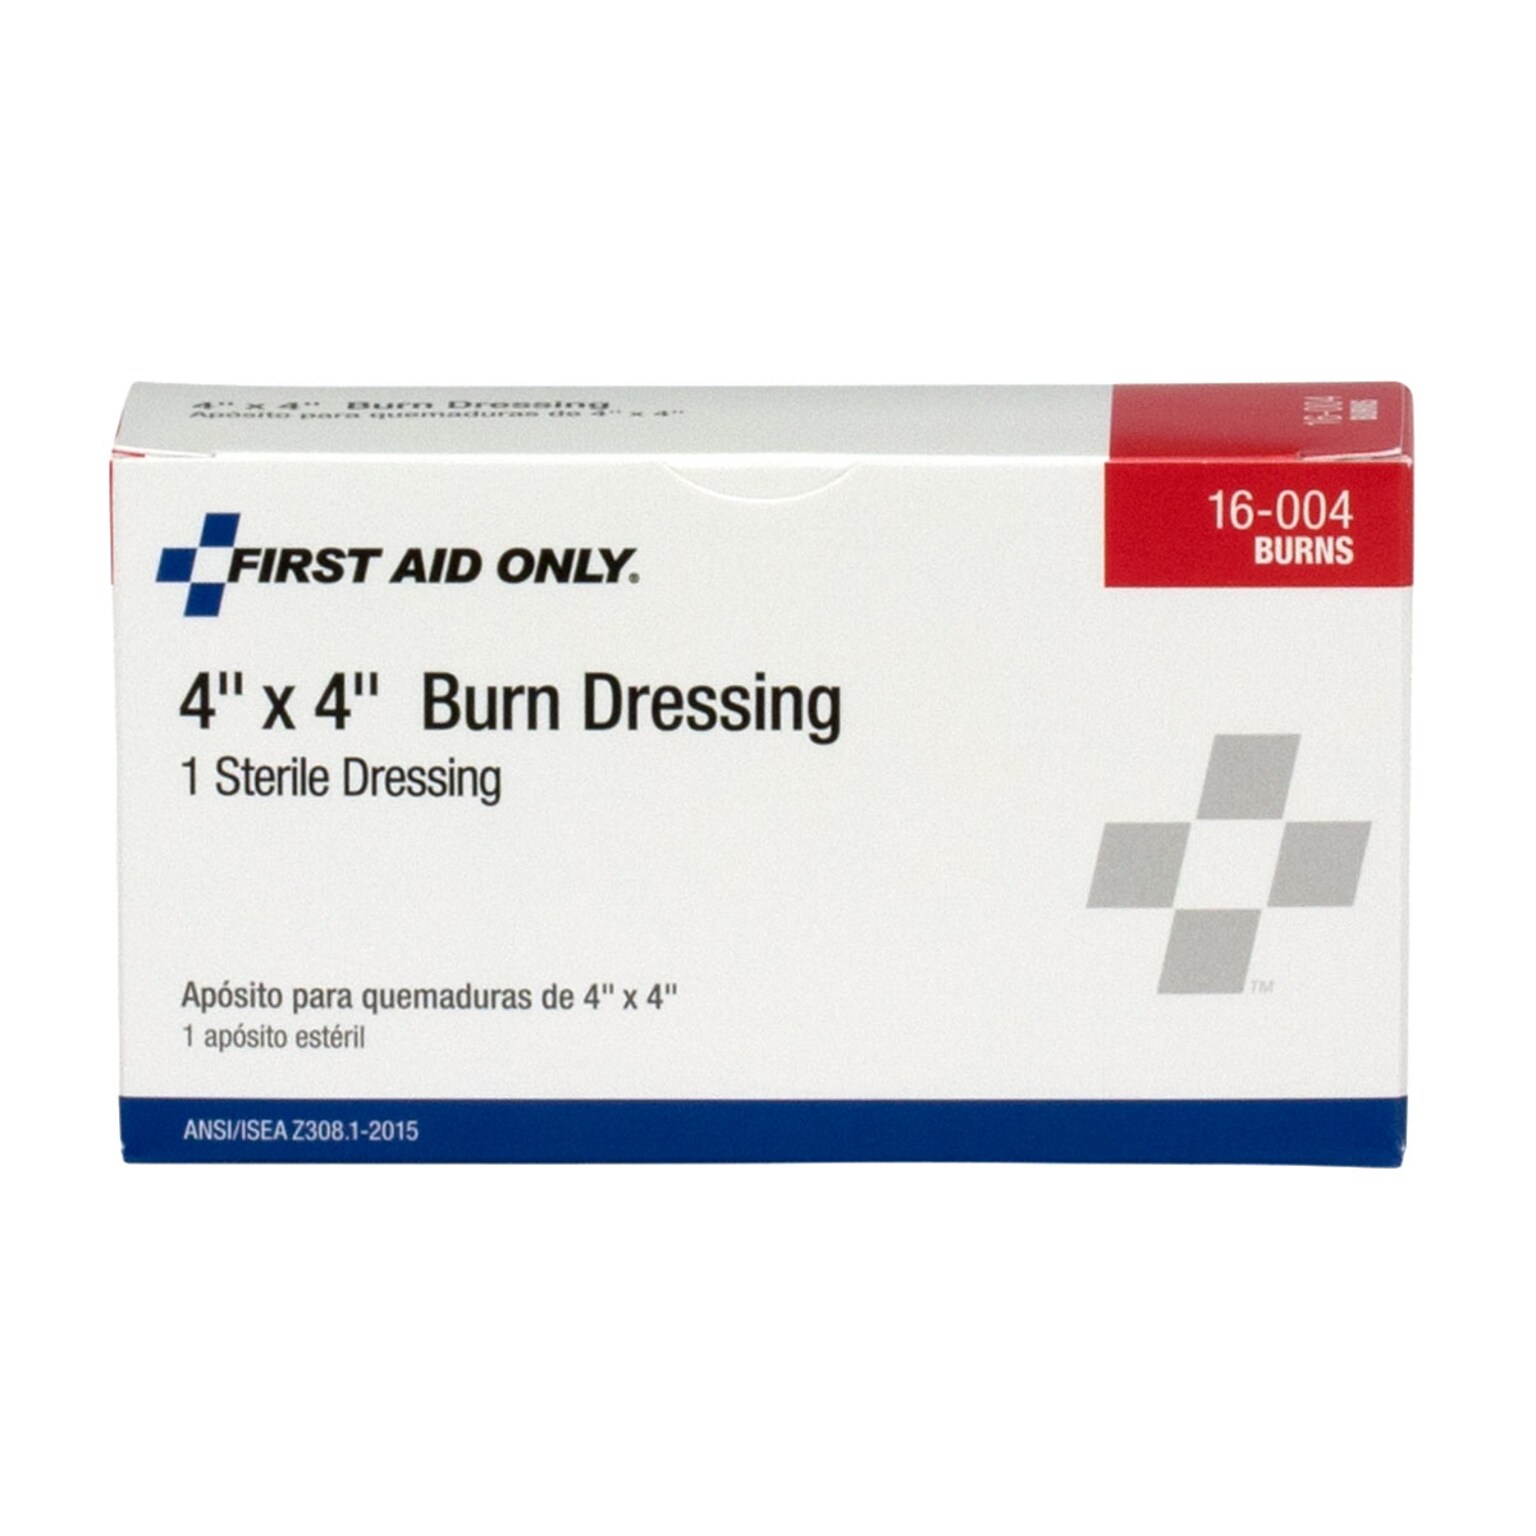 First Aid Only Burn Dressing, 4 x 4 (16-004)